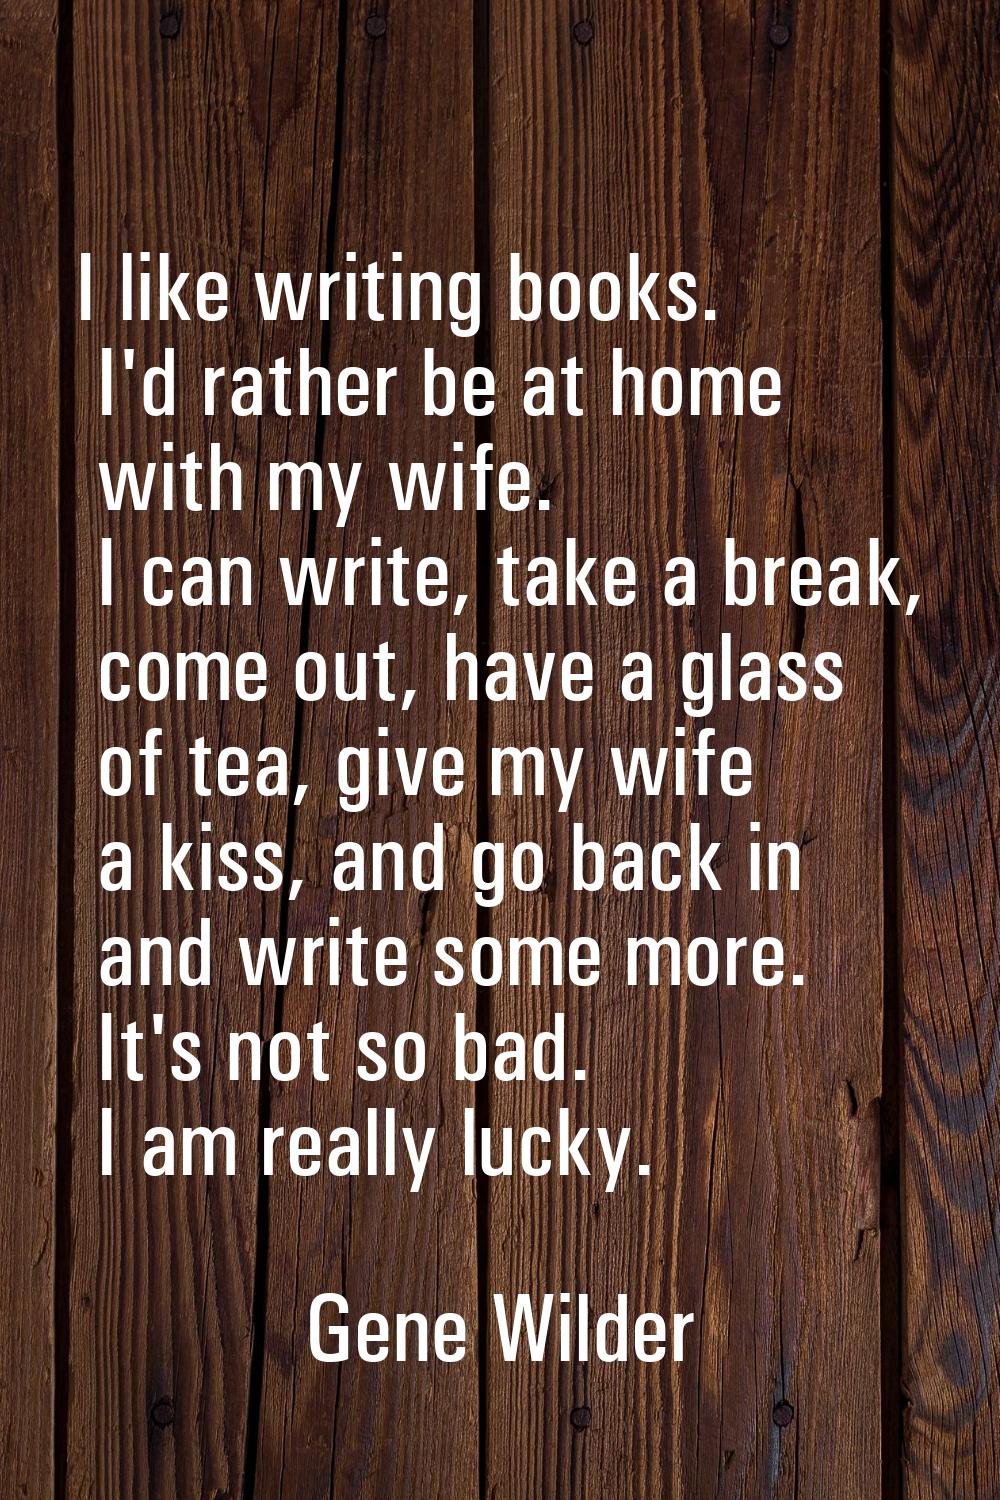 I like writing books. I'd rather be at home with my wife. I can write, take a break, come out, have